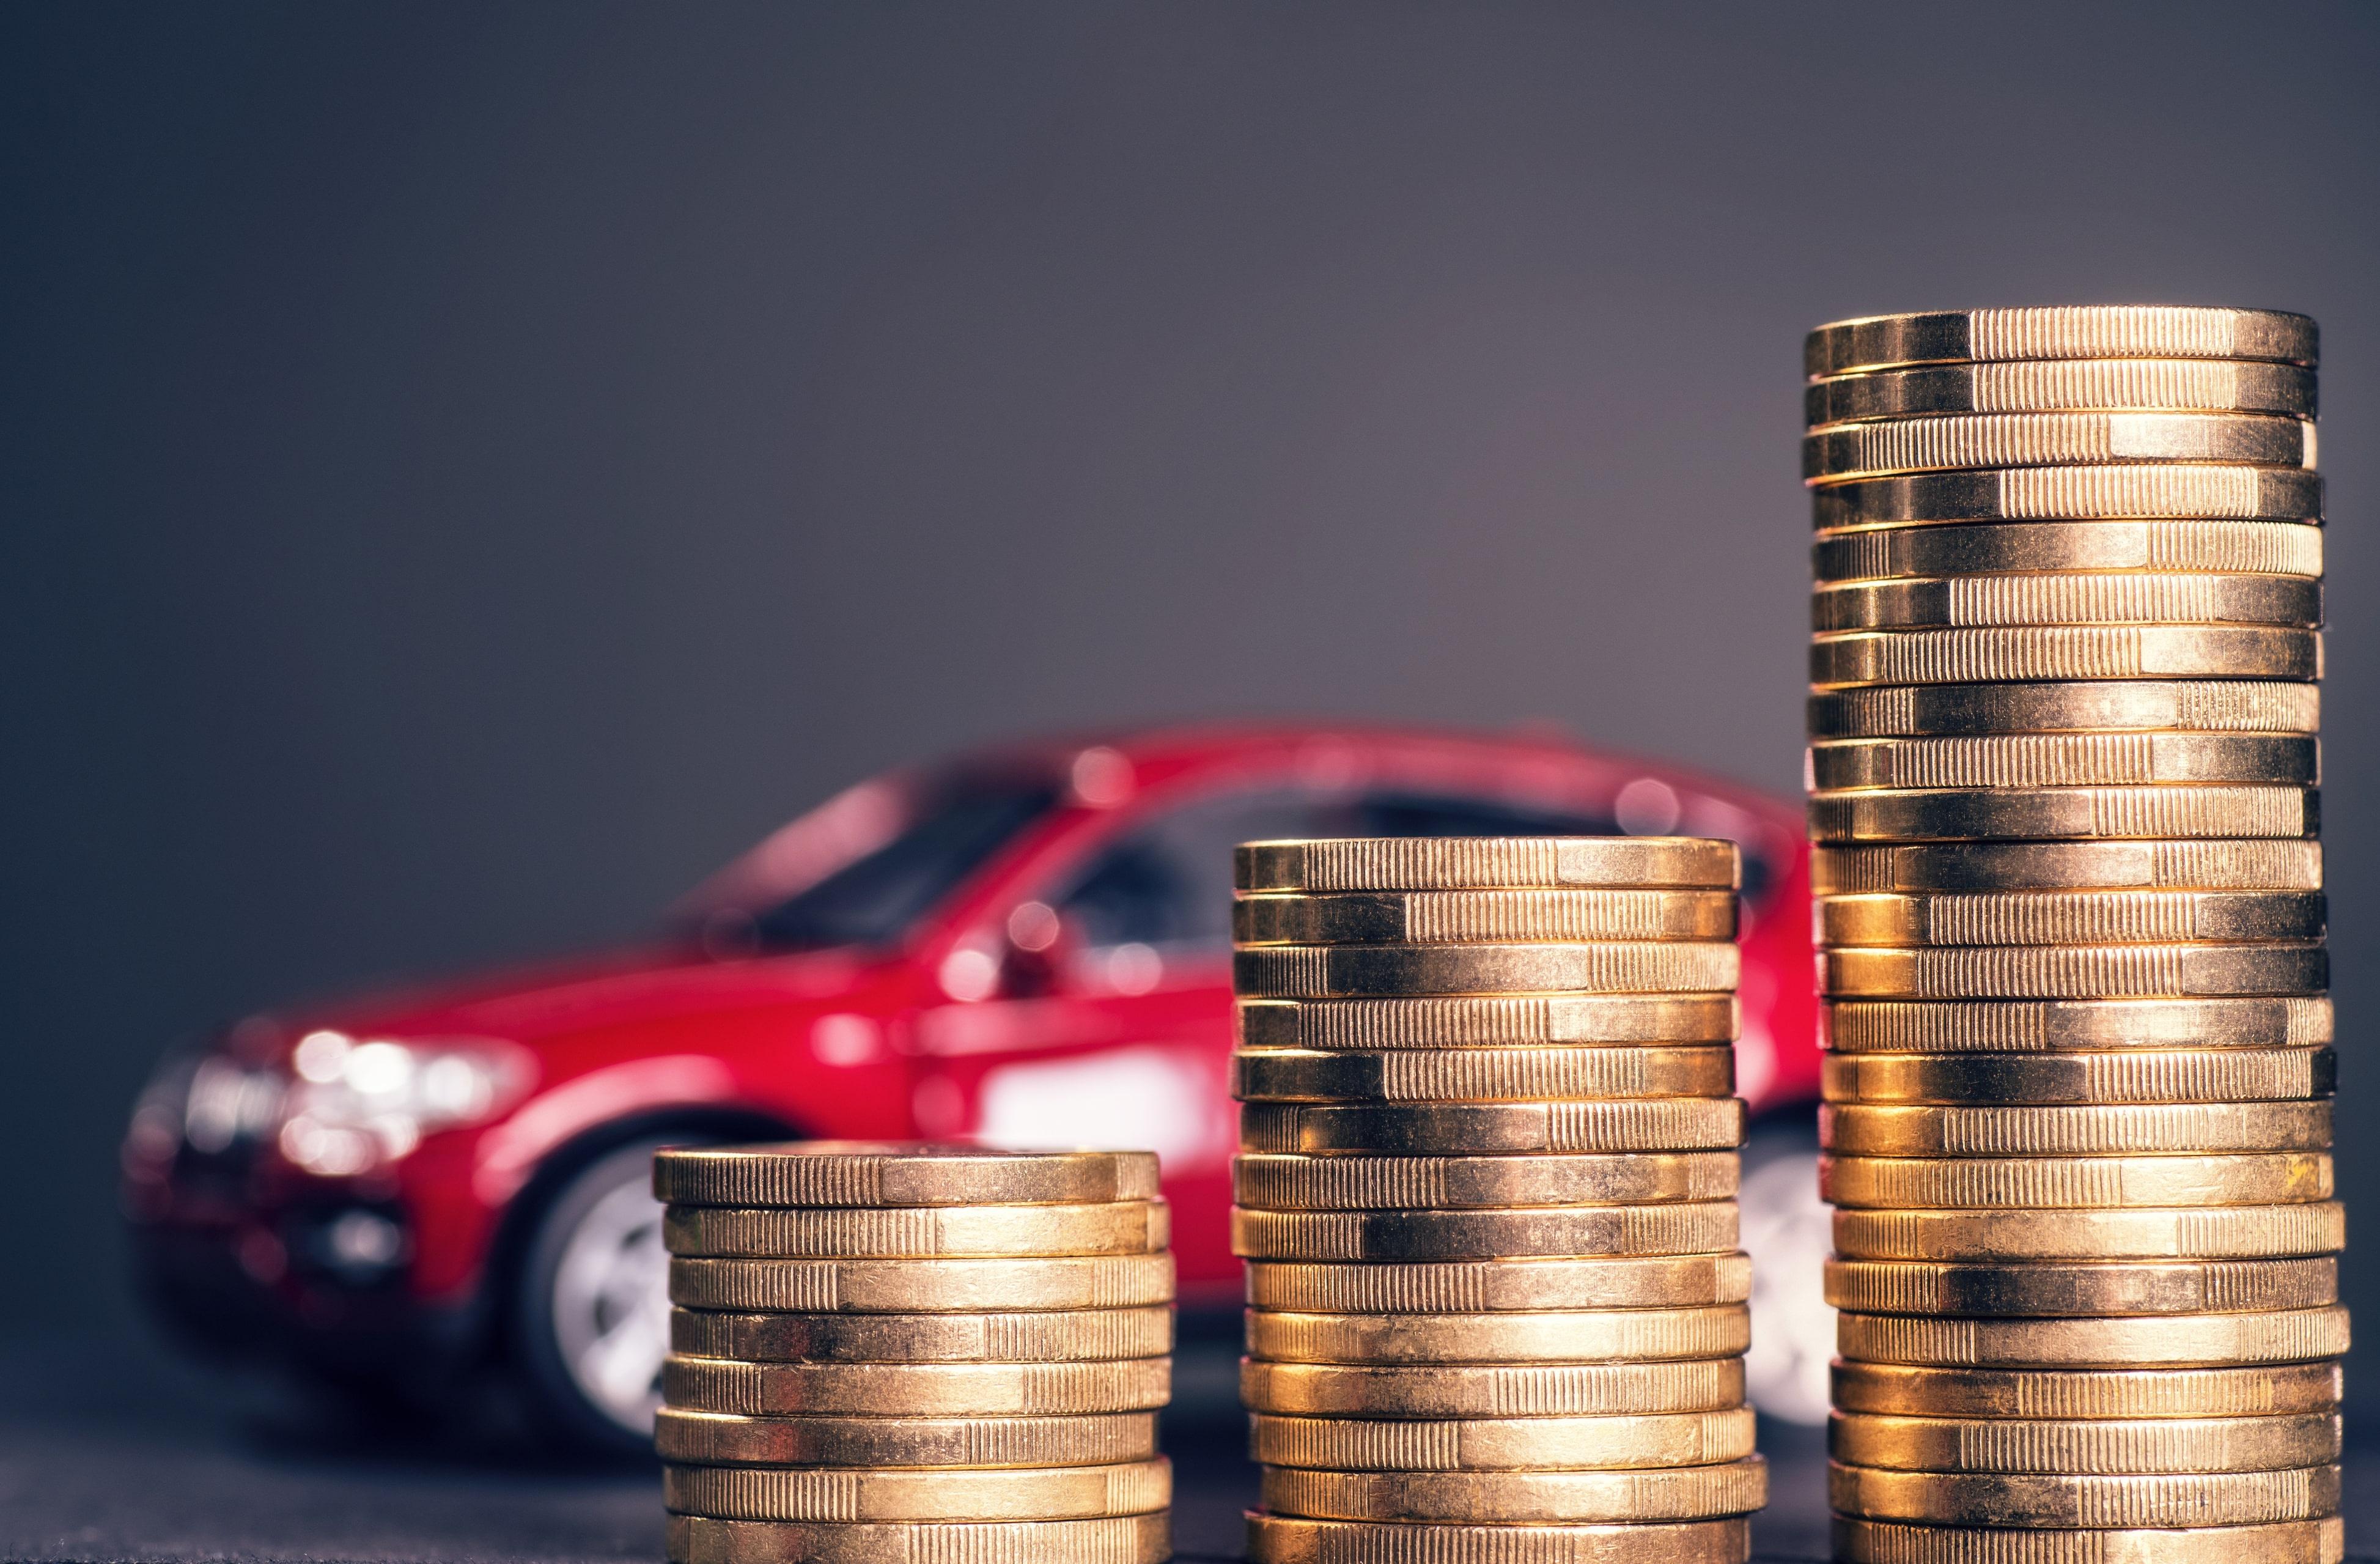 Car Hire prices soar this spring